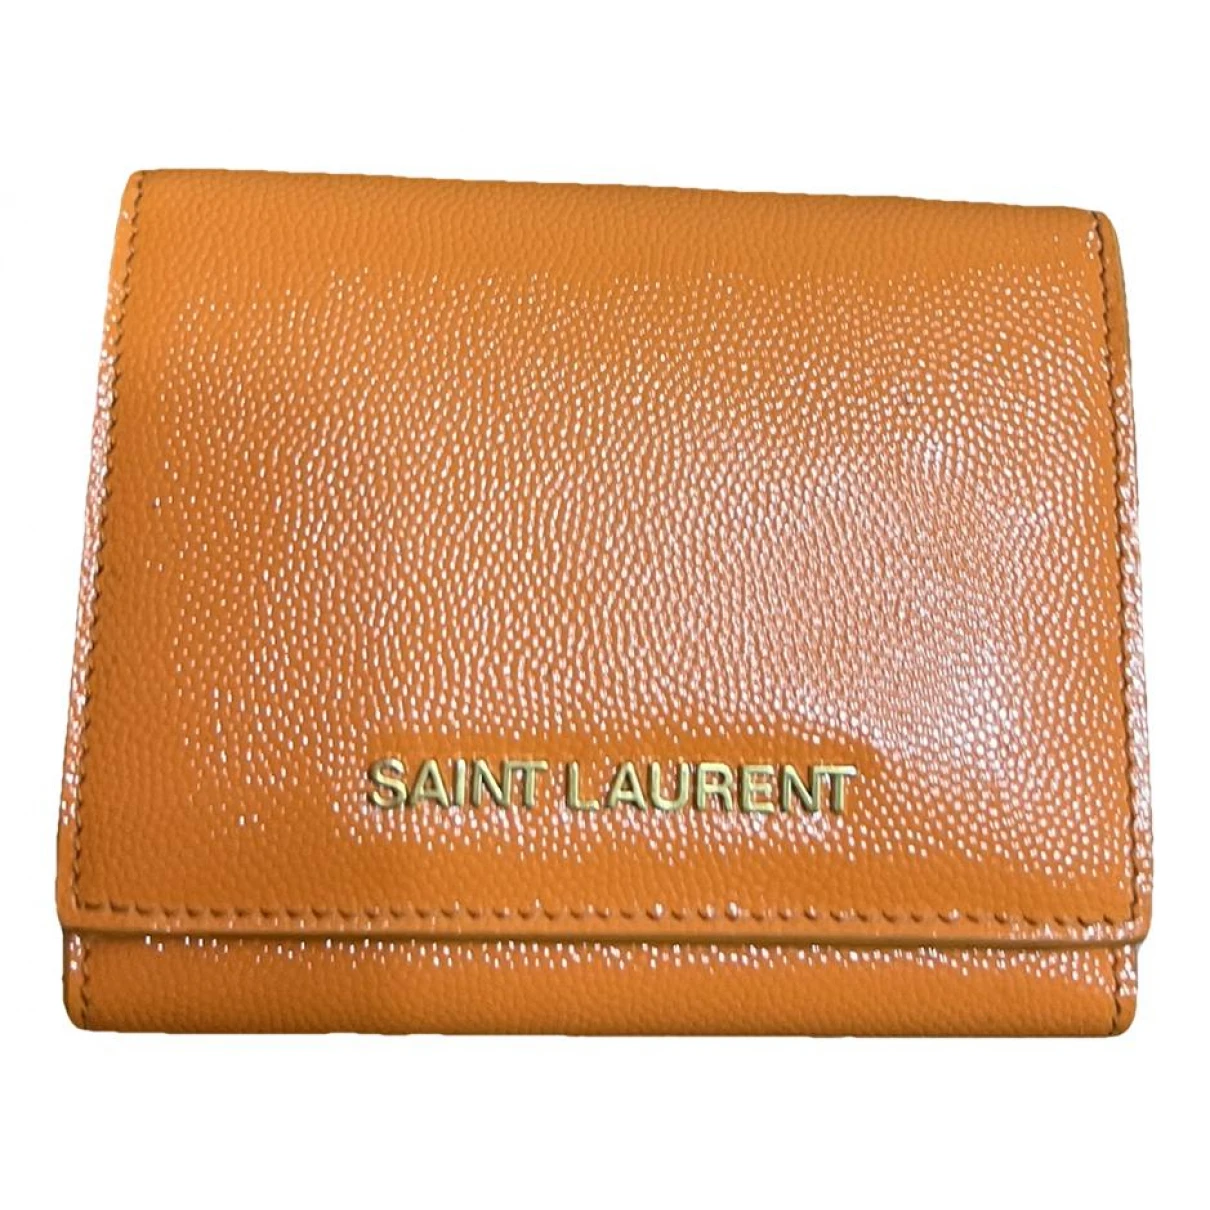 accessories Saint Laurent wallets Rive Gauche for Female Leather. Used condition